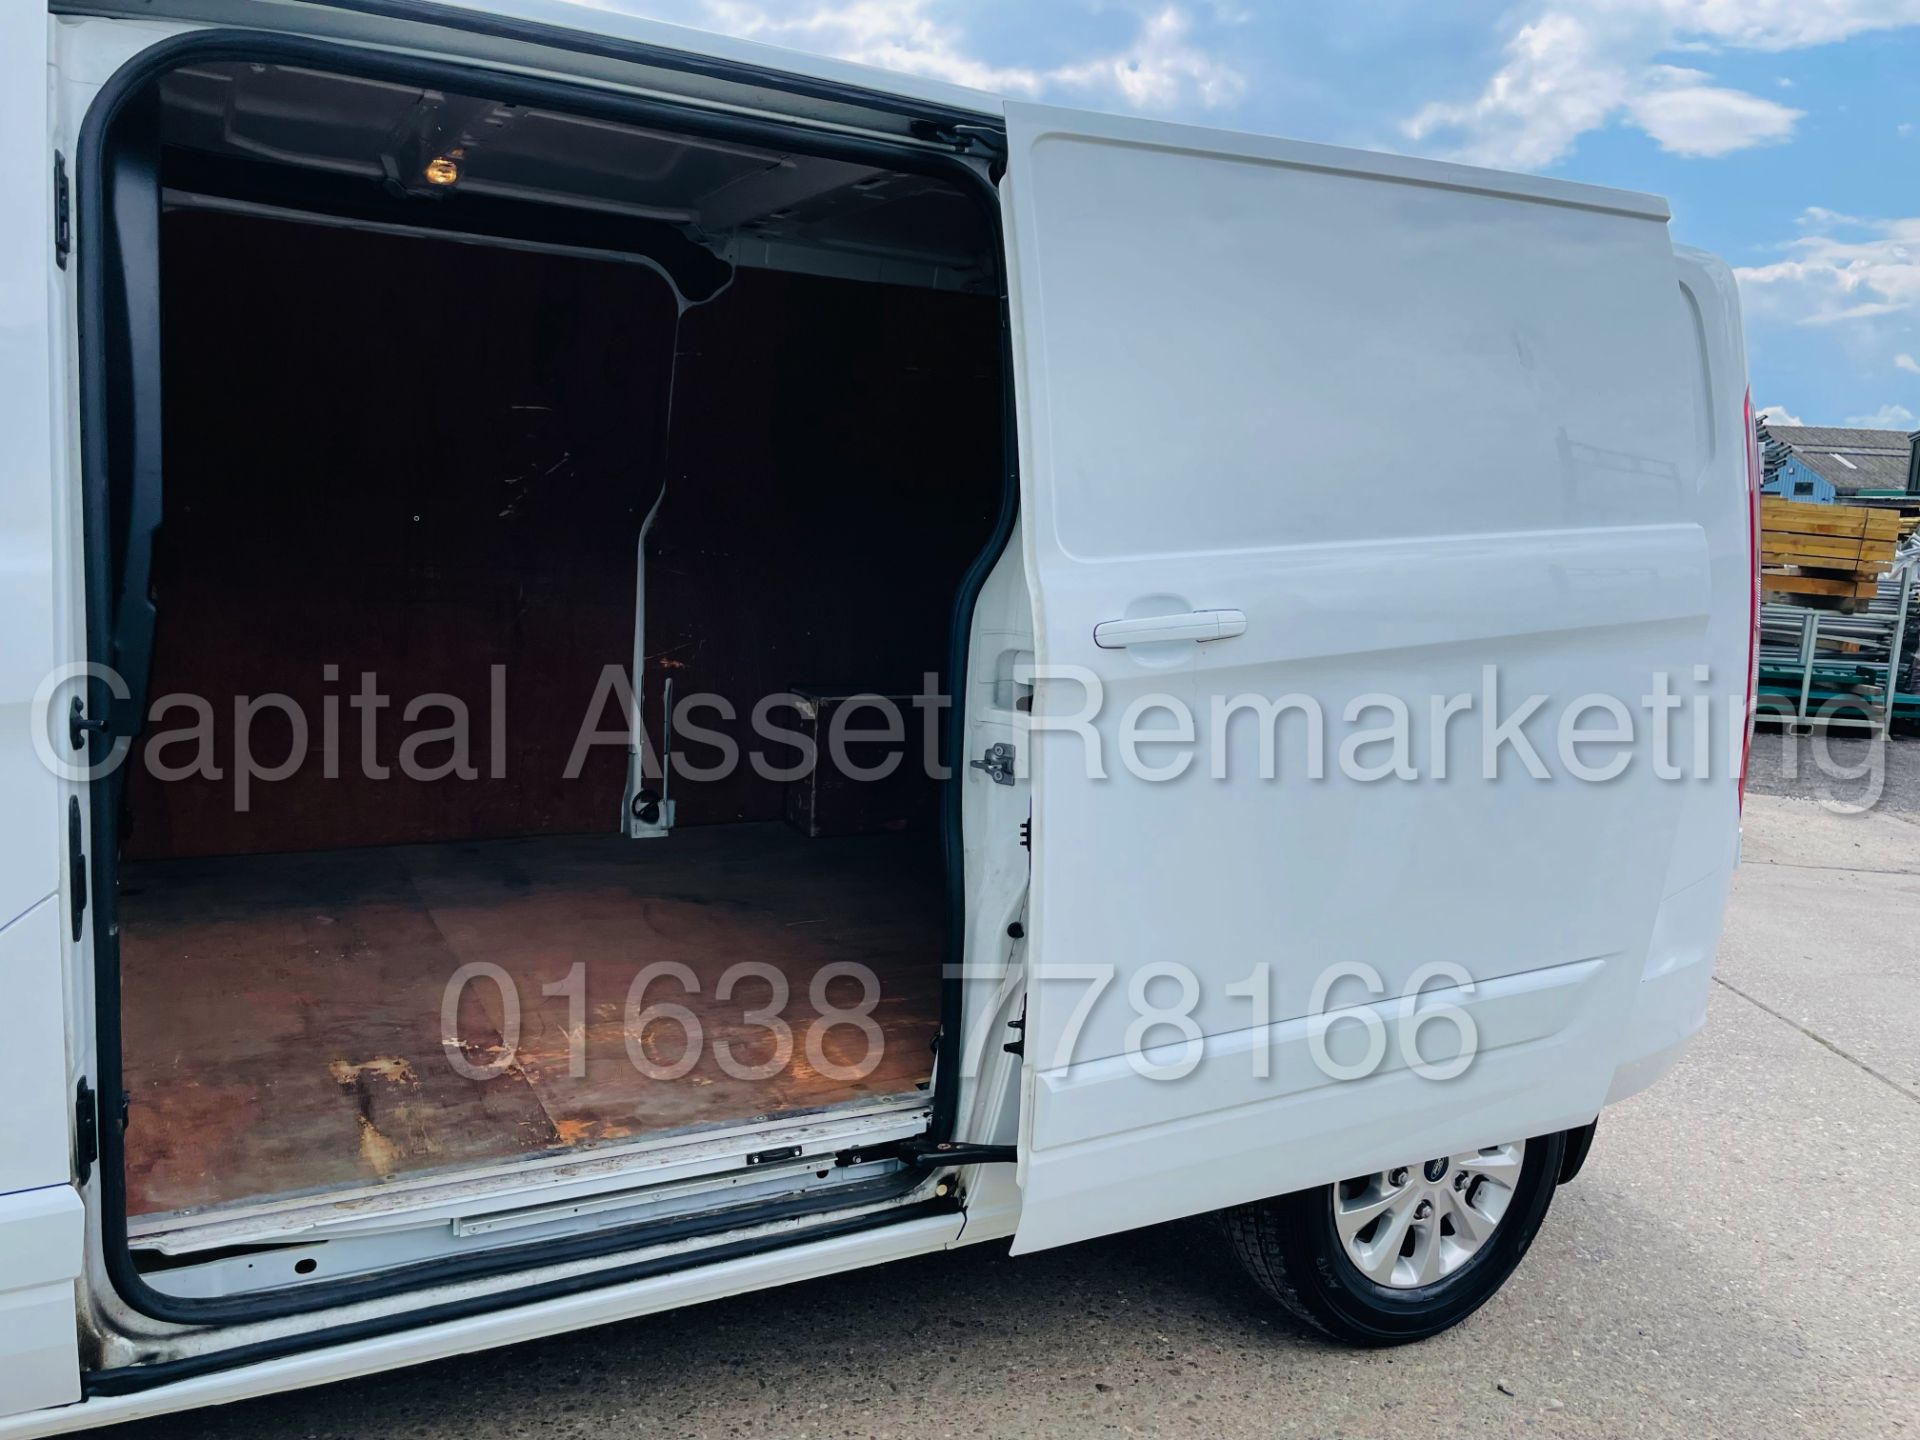 FORD TRANSIT CUSTOM *LIMITED EDITION* PANEL VAN (2018 - NEW MODEL) '2.0 TDCI - EURO 6 - 6 SPEED' - Image 27 of 46